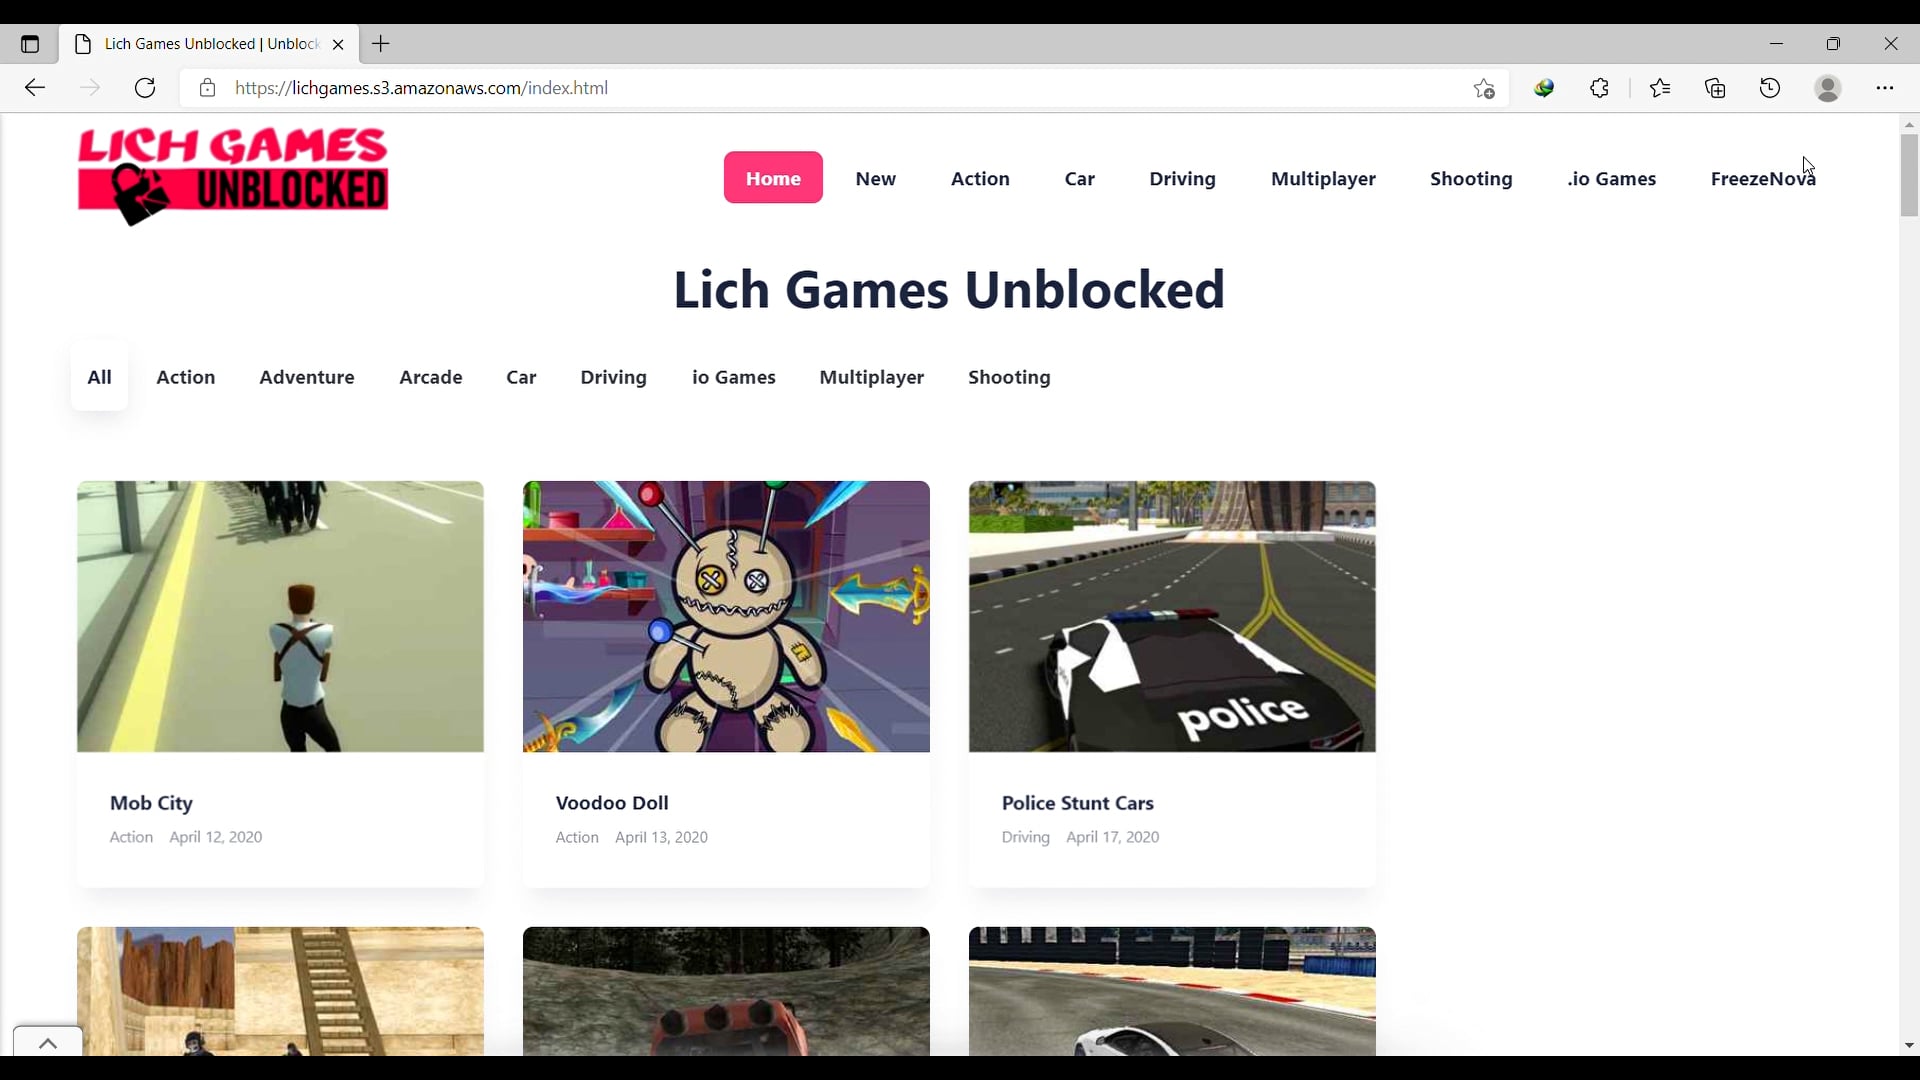 Lich Games Unblocked - Unblocked Games on Vimeo